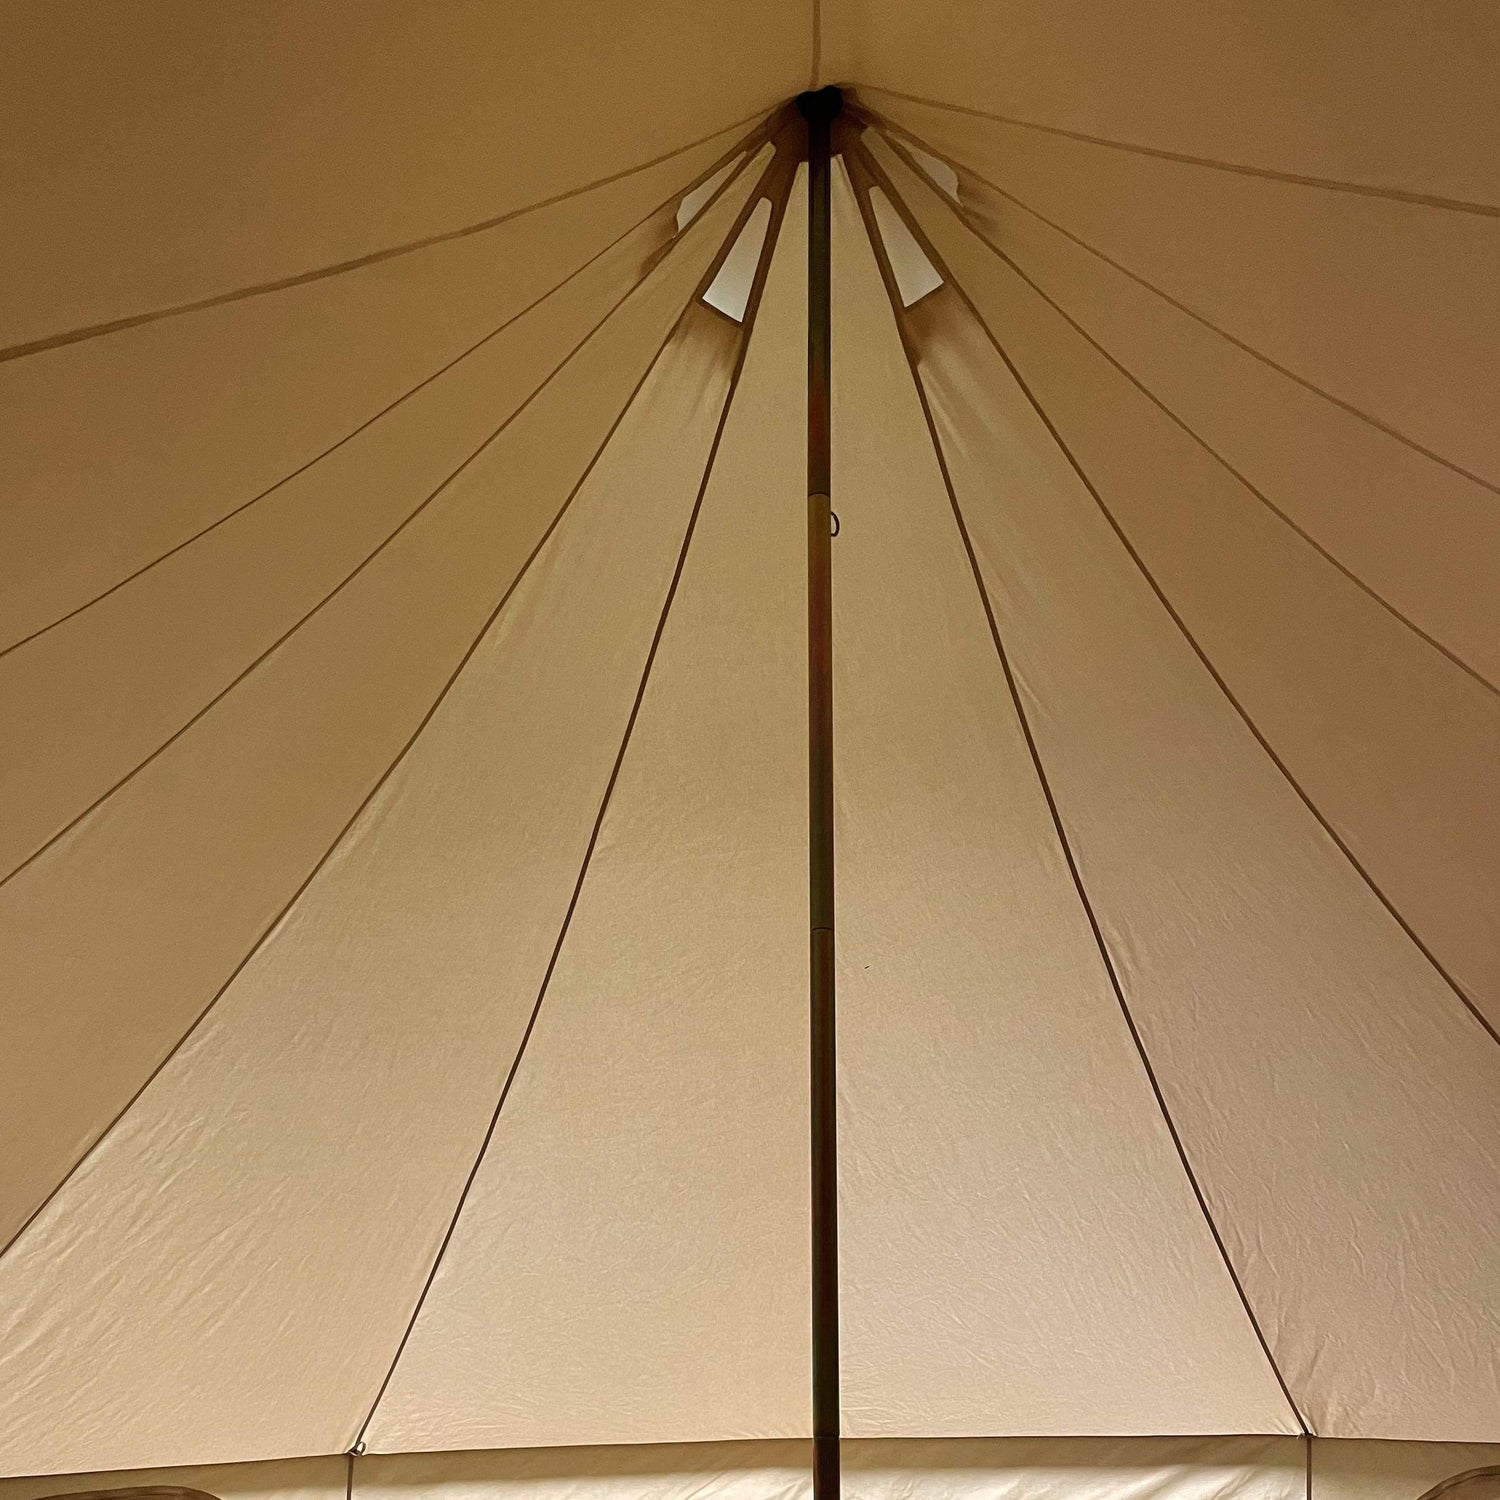 5m Bell Tent - Bell Tent Sussex